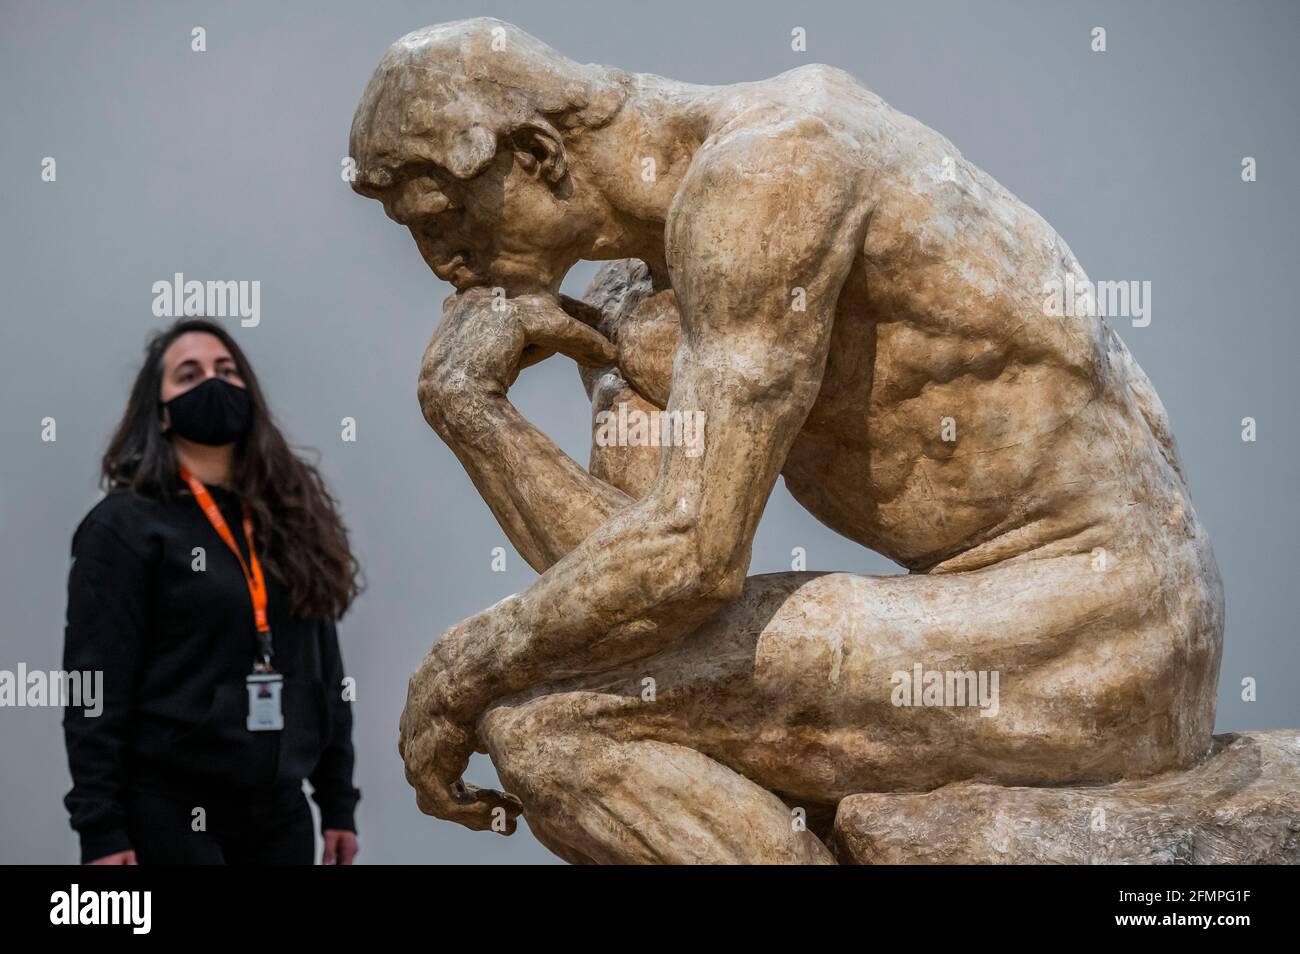 London, UK. 11th May, 2021. The EY Exhibition: The Making of Rodin preview at the Tate Modern. The gallery will reopen, after the latest covid lockdown, with this new exhibition of the works of Aguste Rodin (1840-1917). It shows how he broke the rules of classical sculpture to create a different image of the human body, 'mirroring the ruptures, complexities and uncertainties of the modern age'. Featuring over 200 works, the exhibition is partly thanks to a unique collaboration with the Musée Rodin. Credit: Guy Bell/Alamy Live News Stock Photo